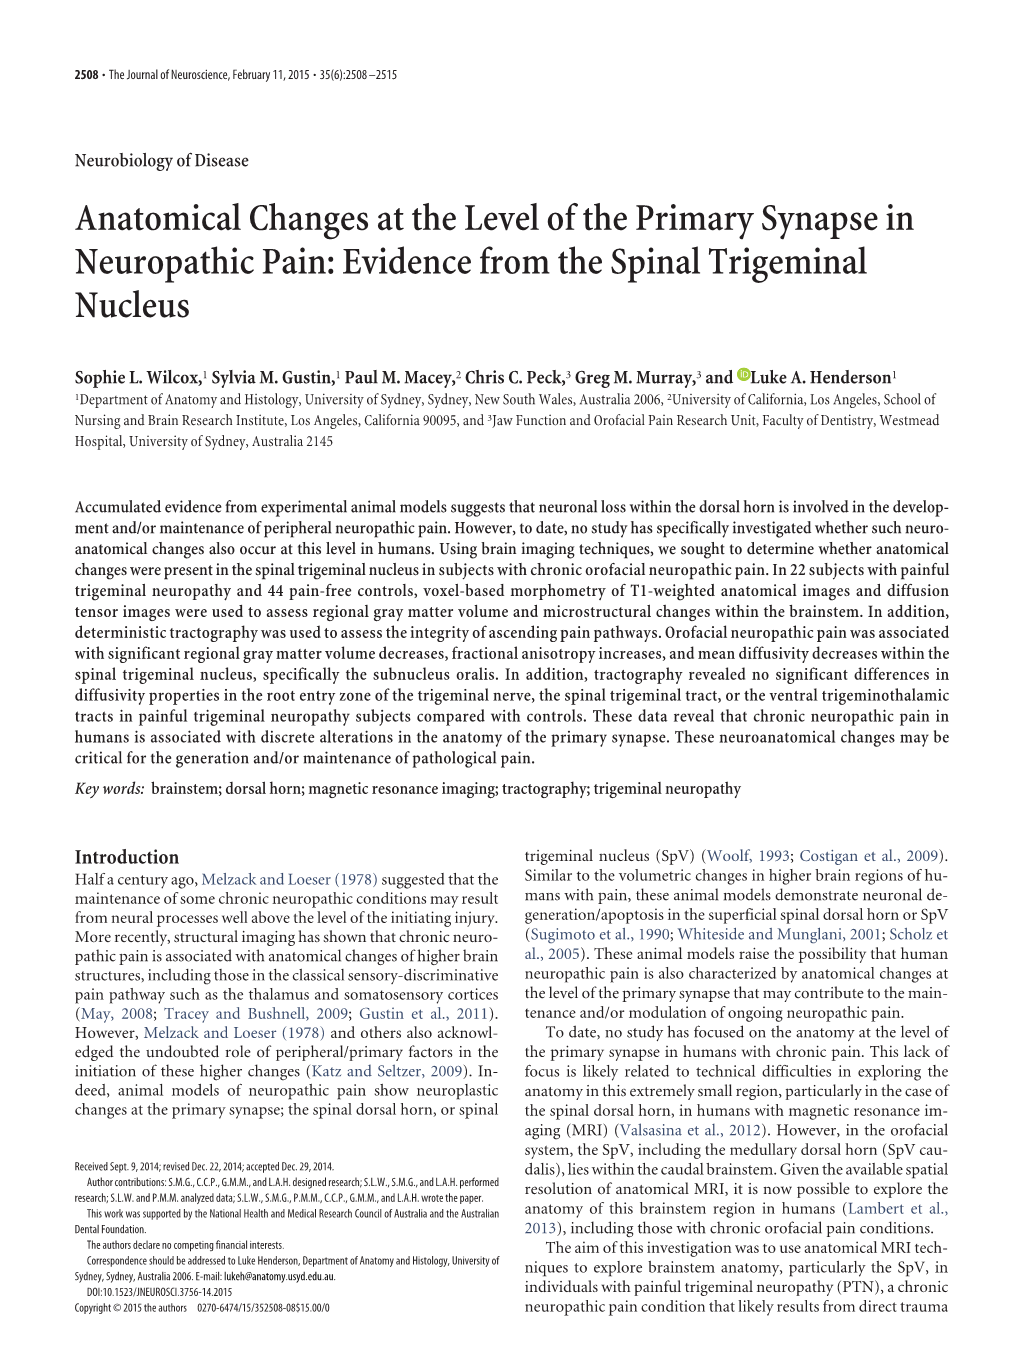 Anatomical Changes at the Level of the Primary Synapse in Neuropathic Pain: Evidence from the Spinal Trigeminal Nucleus